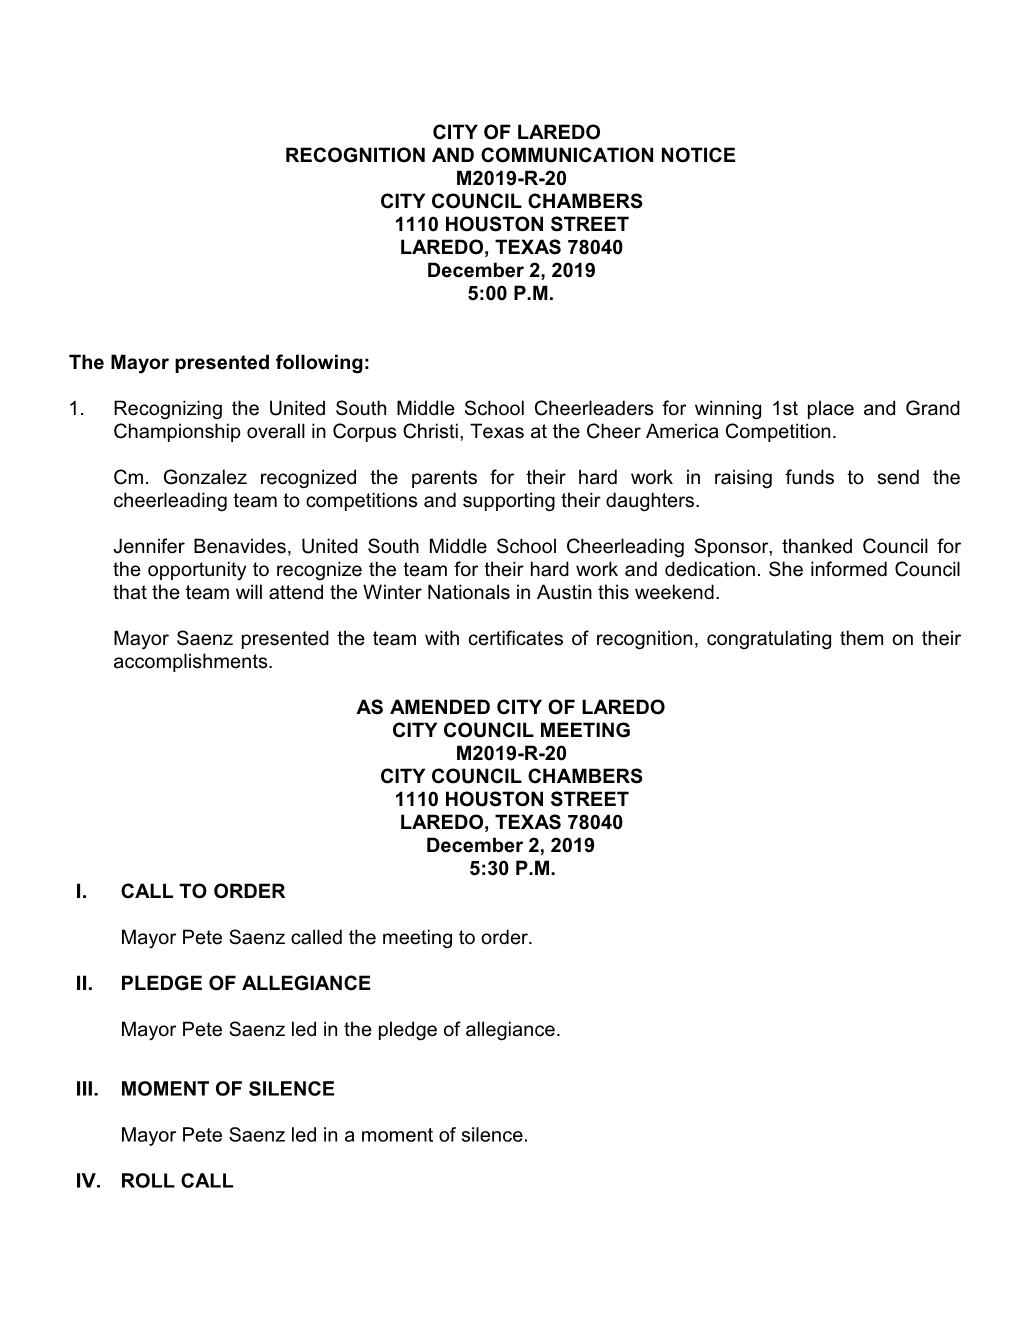 CITY of LAREDO RECOGNITION and COMMUNICATION NOTICE M2019-R-20 CITY COUNCIL CHAMBERS 1110 HOUSTON STREET LAREDO, TEXAS 78040 December 2, 2019 5:00 P.M